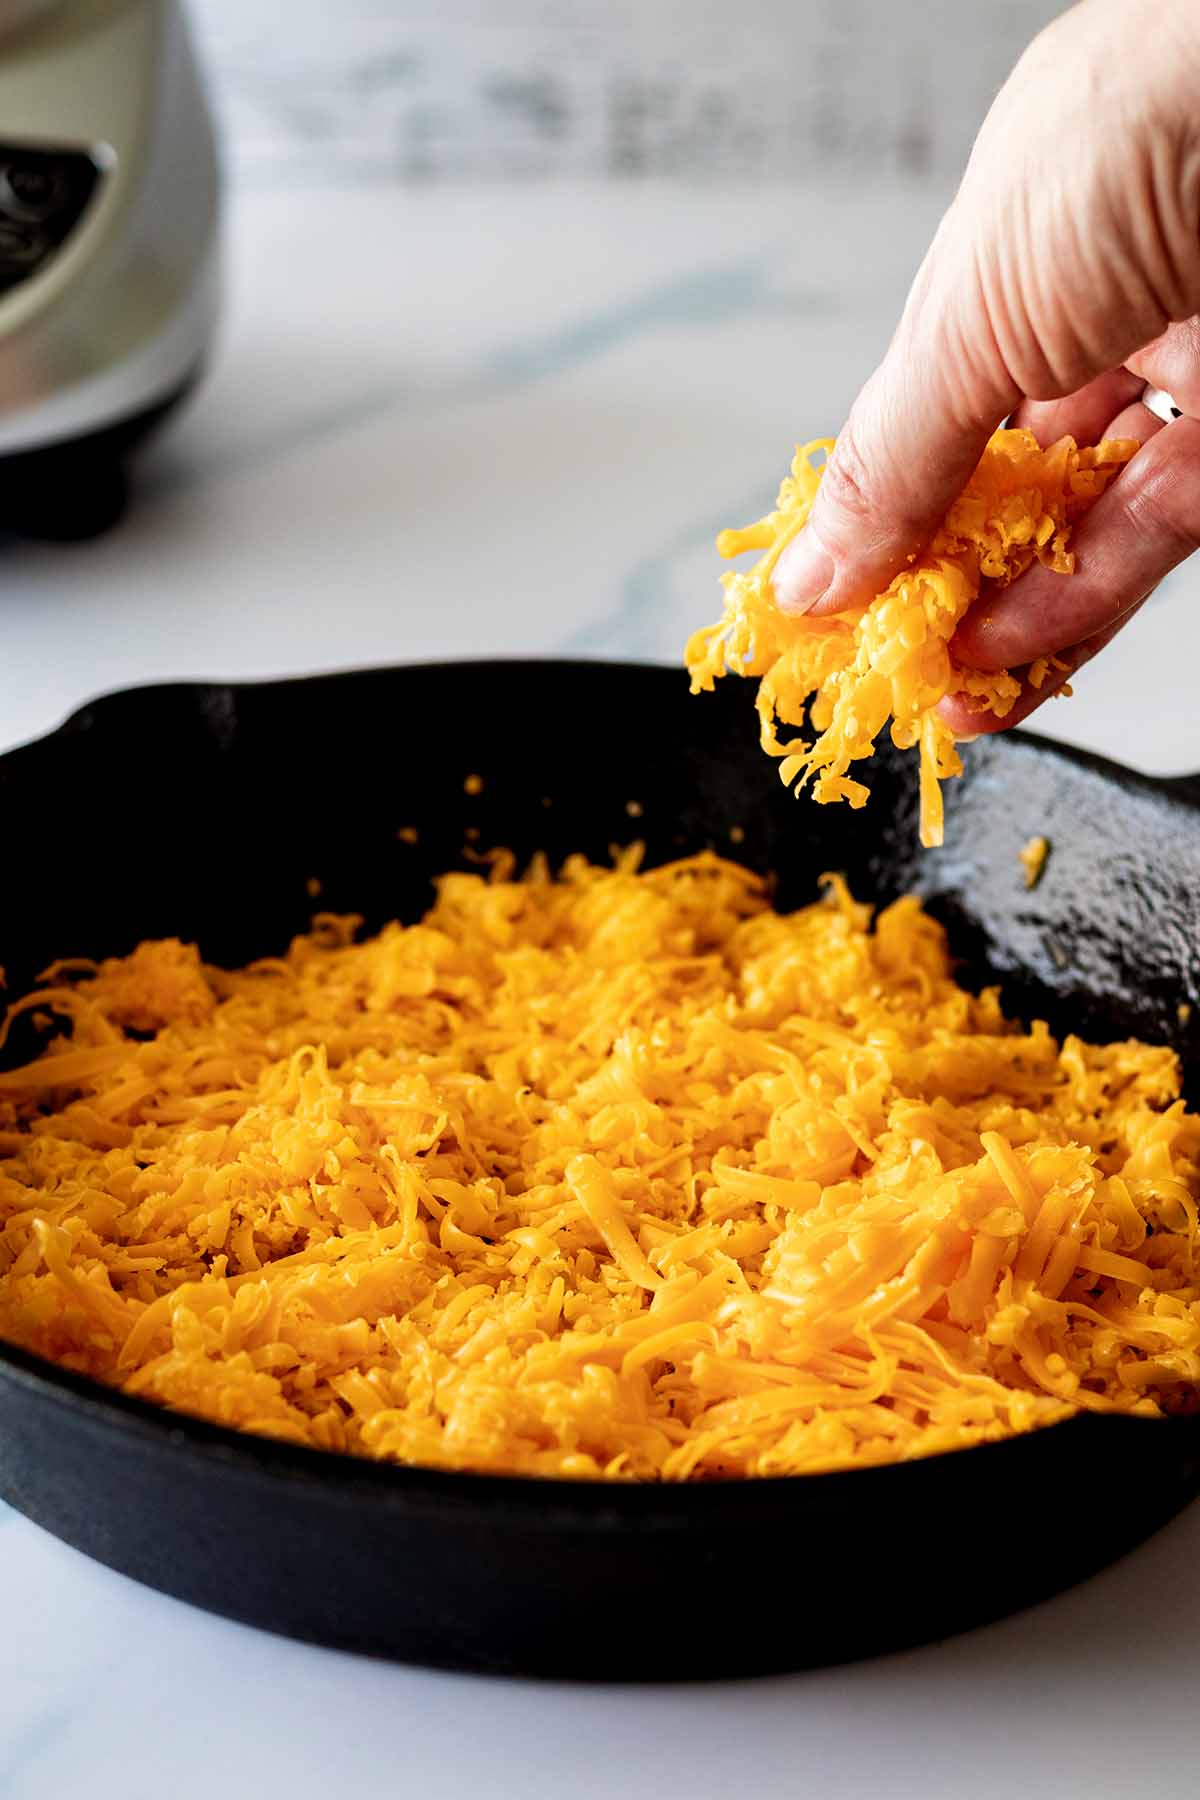 Grated cheddar cheese being sprinkled on the bottom of a cast iron skillet